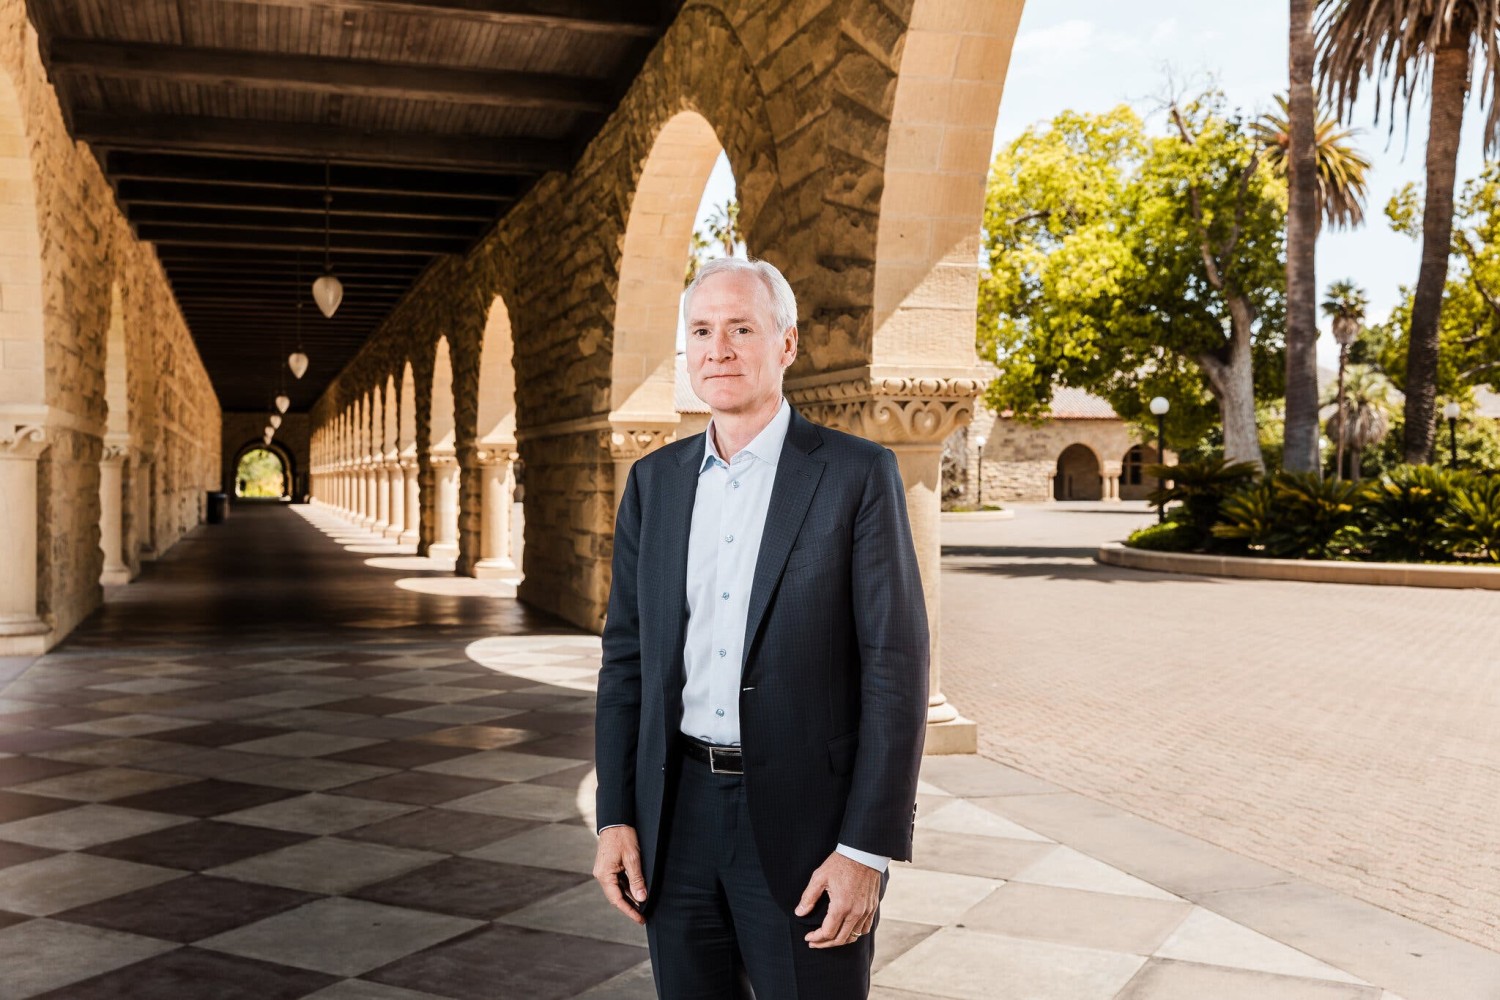 Marc Tessier-Lavigne, the president of Stanford University, in Palo Alto, Calif.Credit...Carolyn Fong for The New York Times